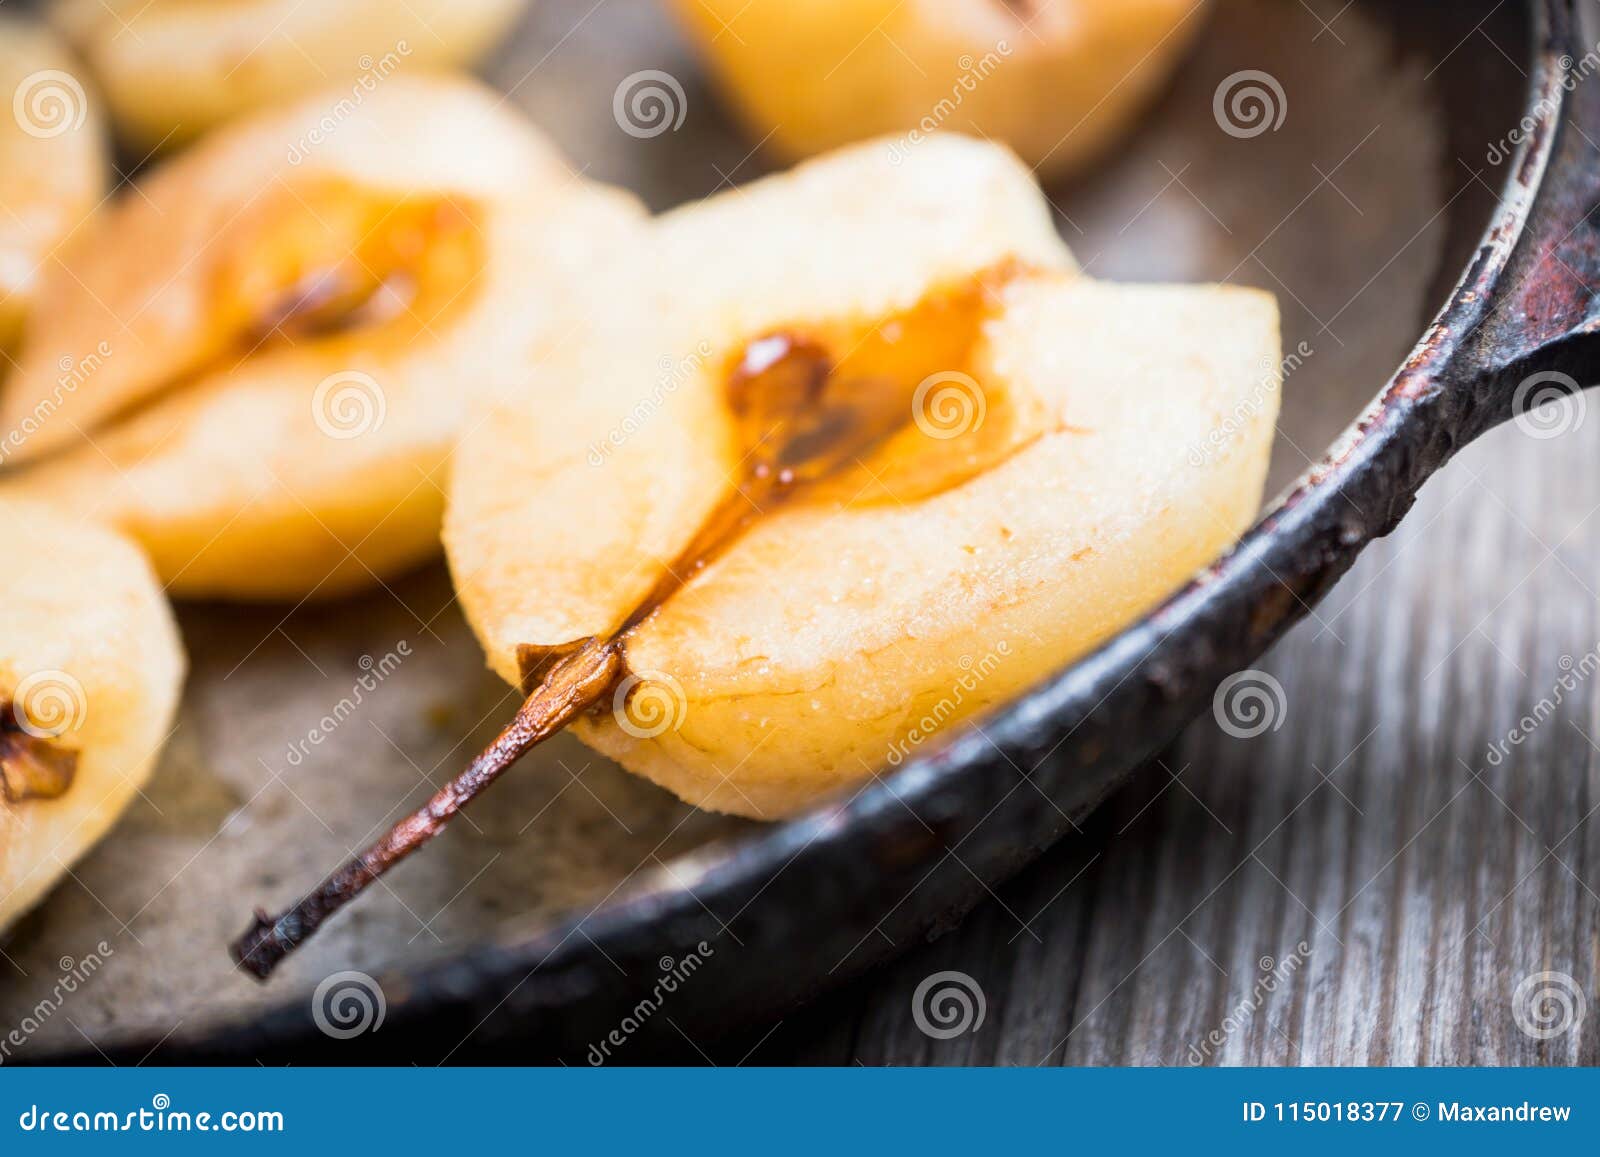 Grilled Pears With Cinnamon And Honey On The Rustic Background Stock Image Image Of Halves Background 115018377,Fettuccine